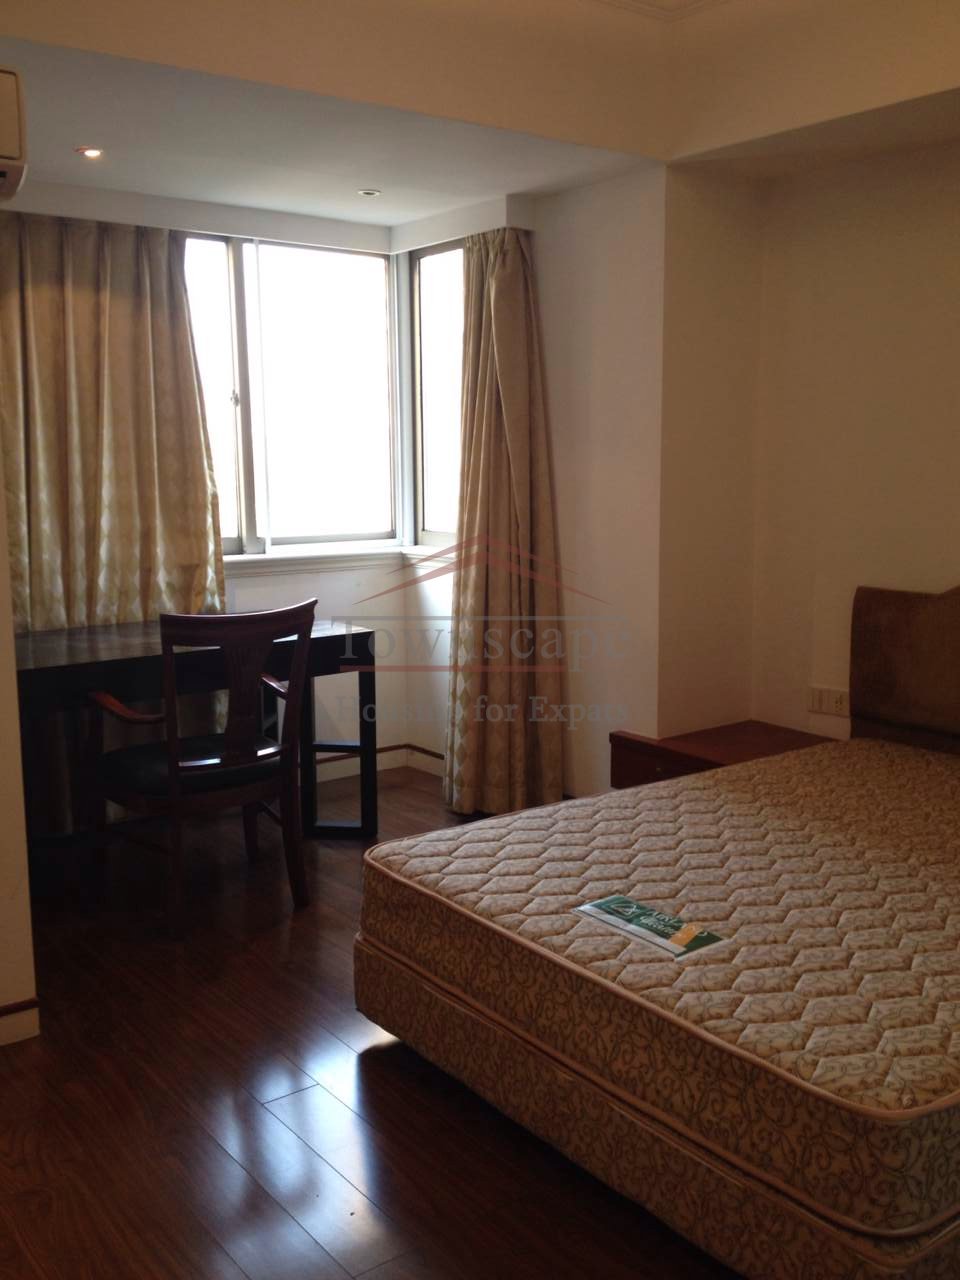 Rent apartment in Shanghai Spacious 2 Bed Apartment in French Concession L9 Jiashan rd